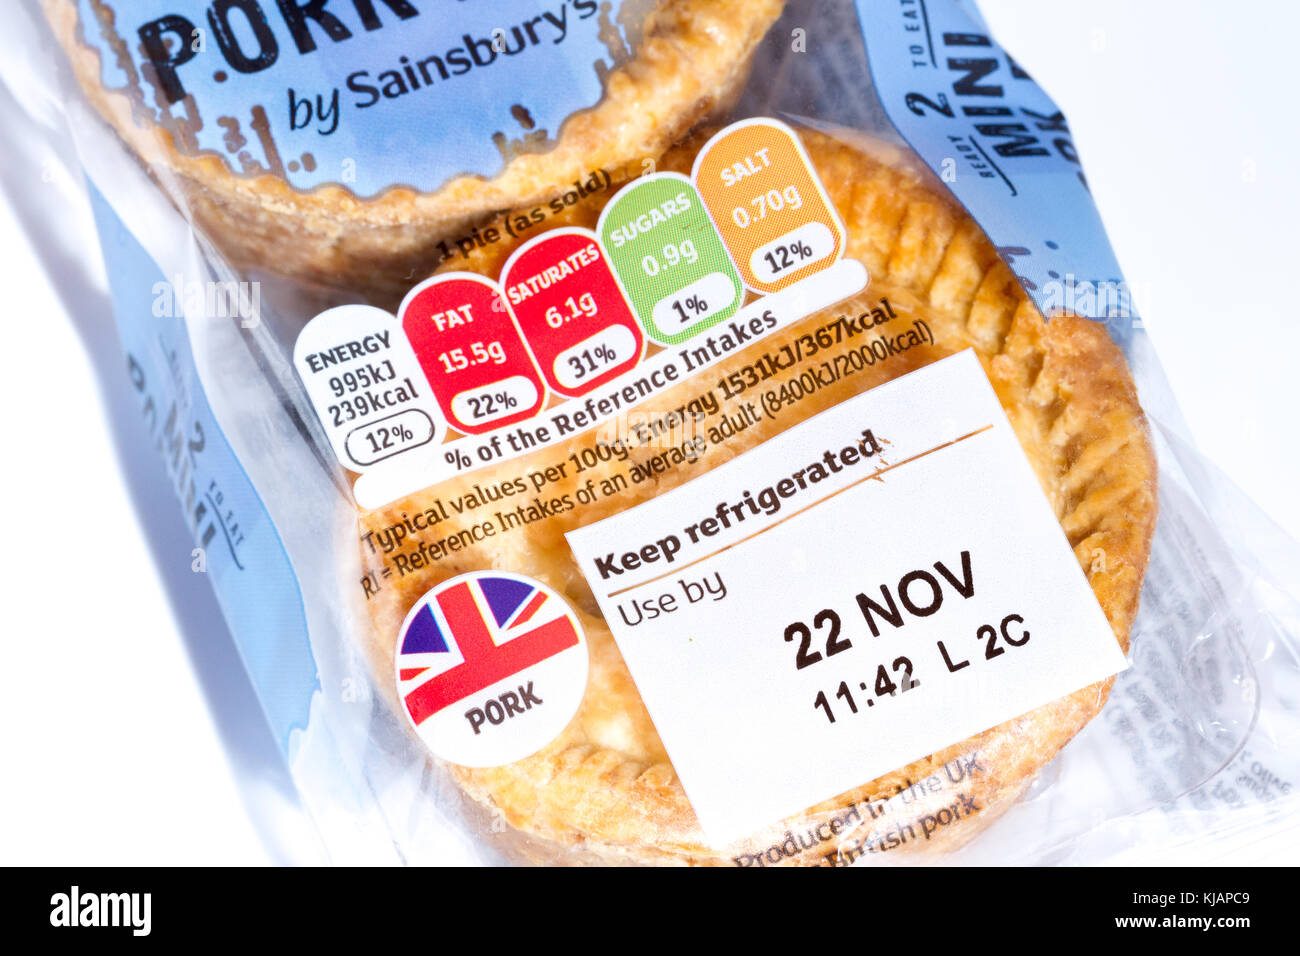 Use by date & nutritional information traffic light rating system on a pack of Sainsbury's 2 mini pork pies, United Kingdom Stock Photo